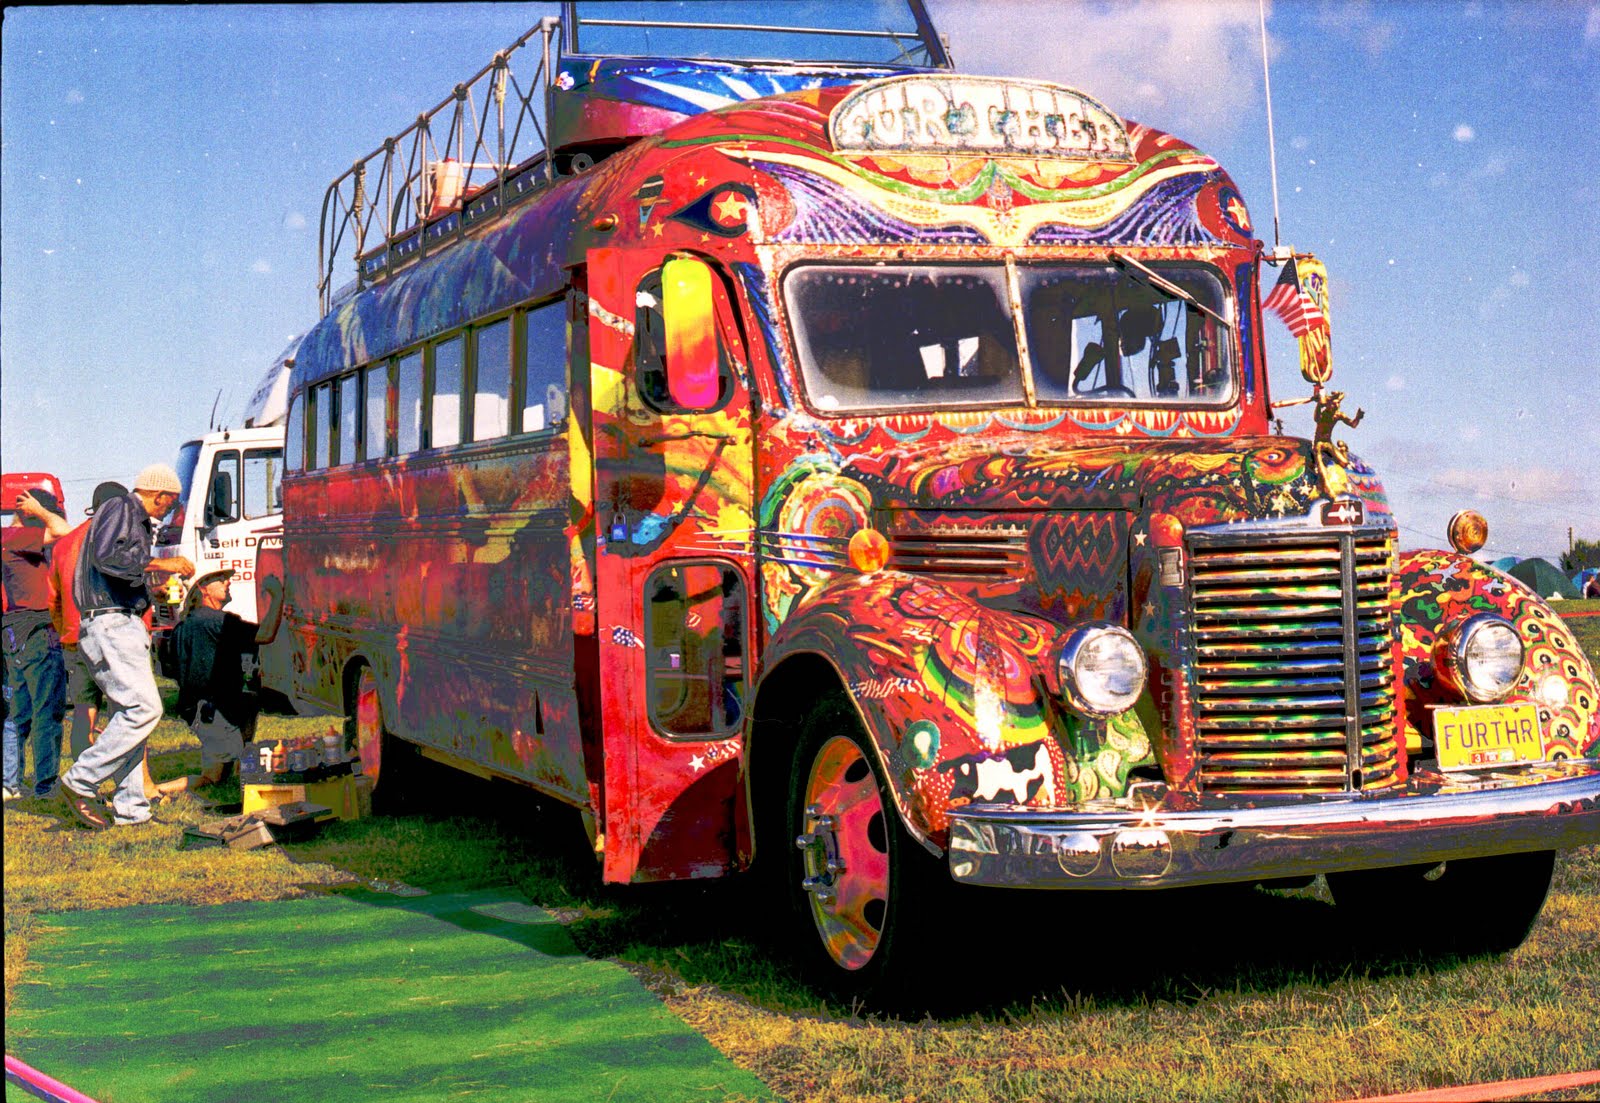 The Mind of Jane Melamed: Riding on Ken Kesey's Bus